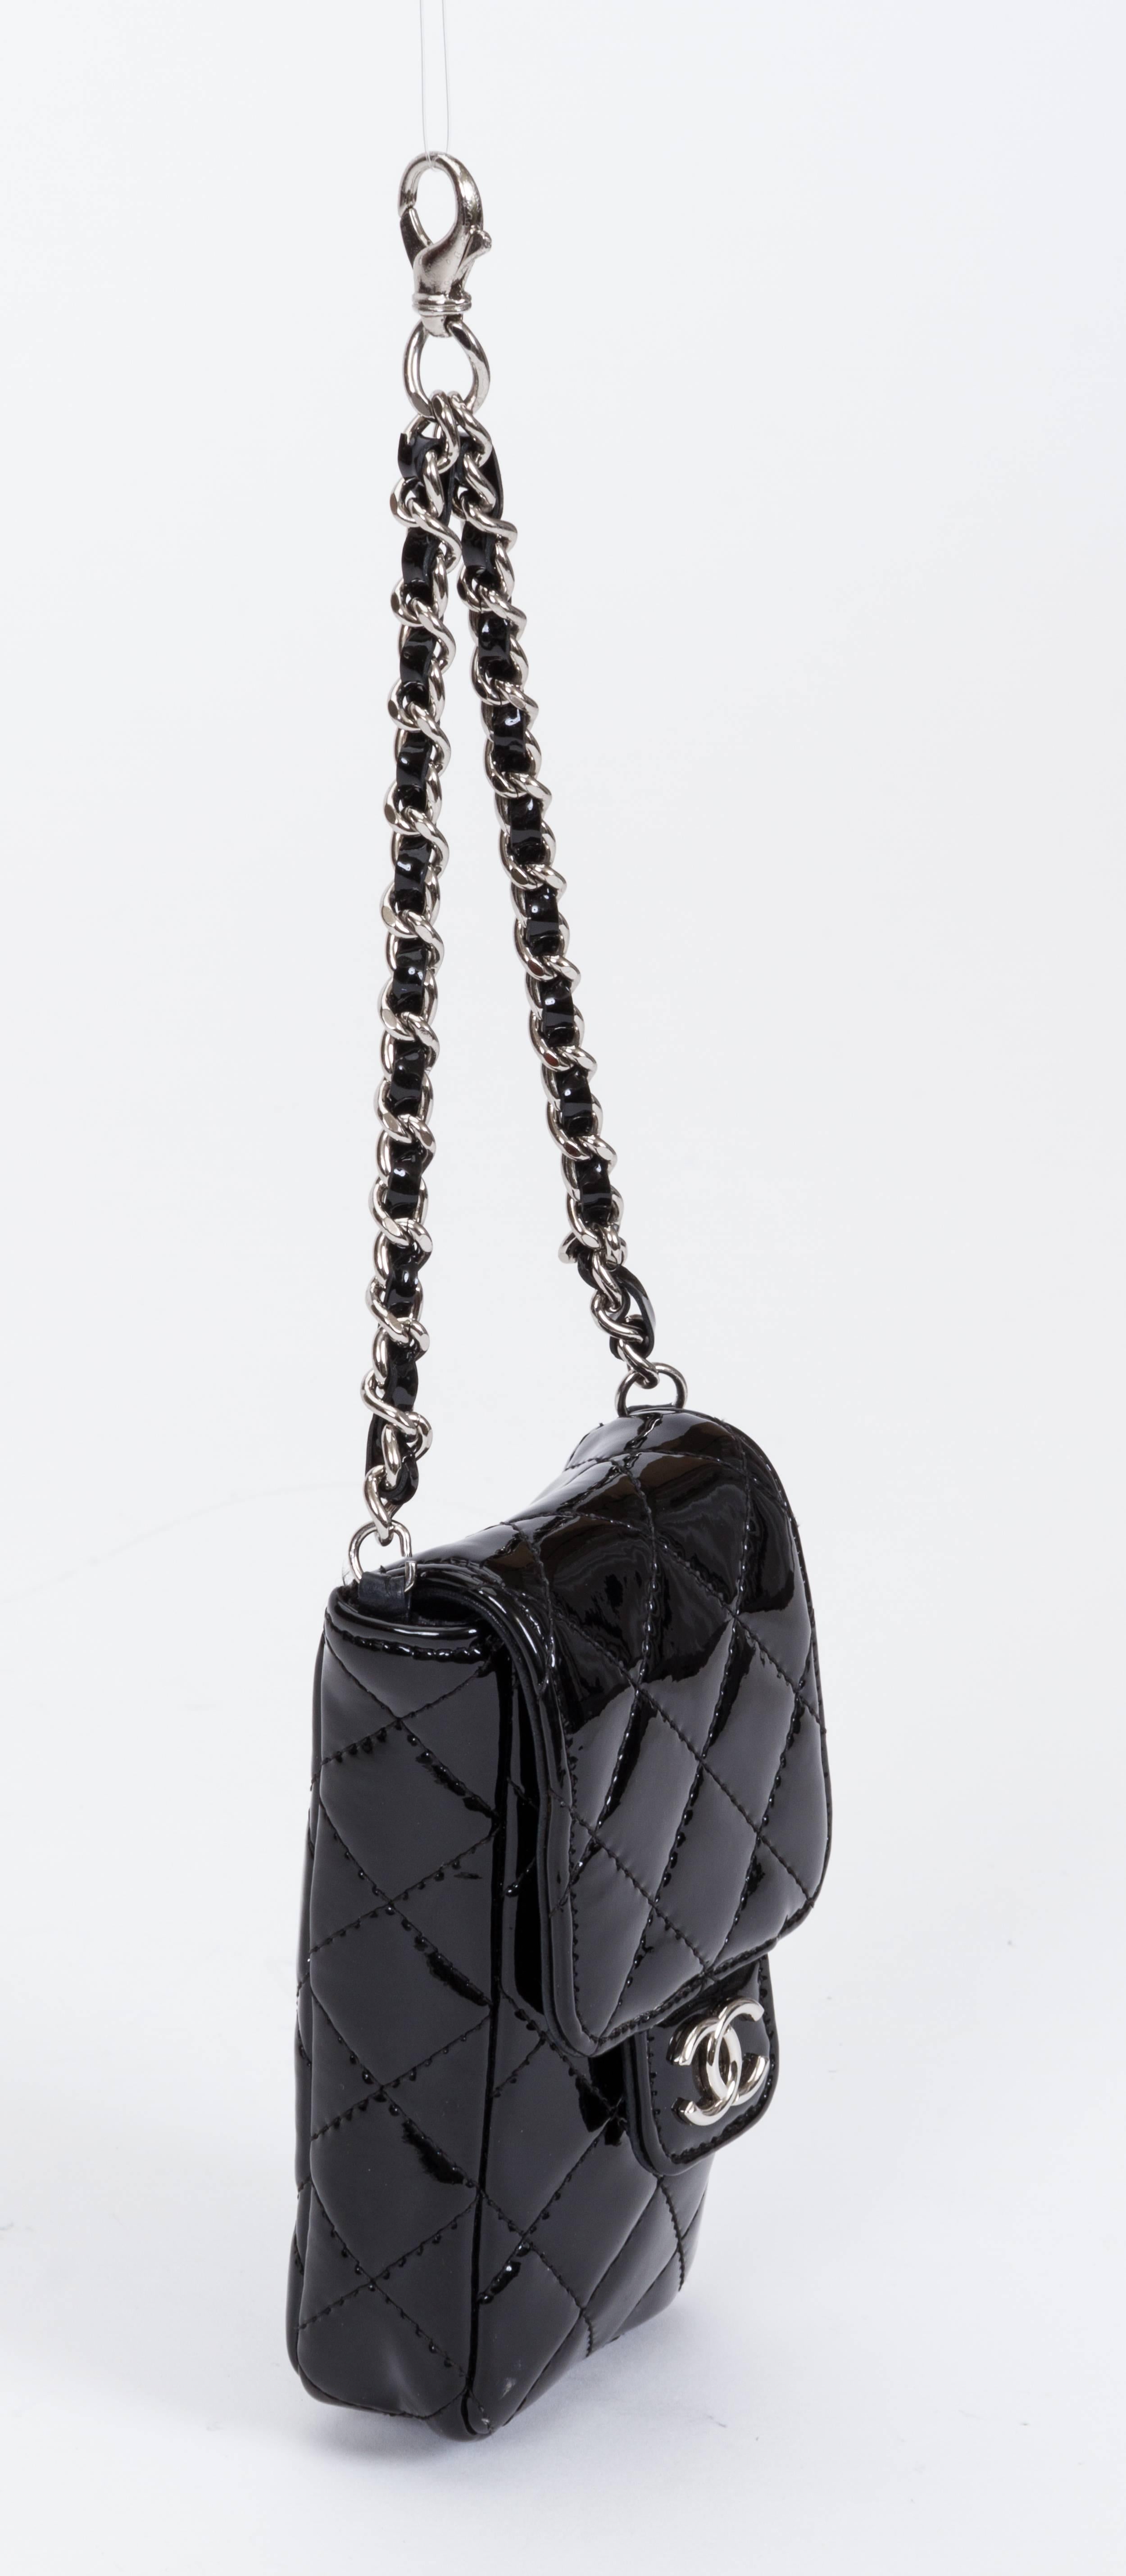 Chanel black patent leather charm purse. Can be attached to a purse or a belt. Cruise collection 2010. Chain drop 5 3/4